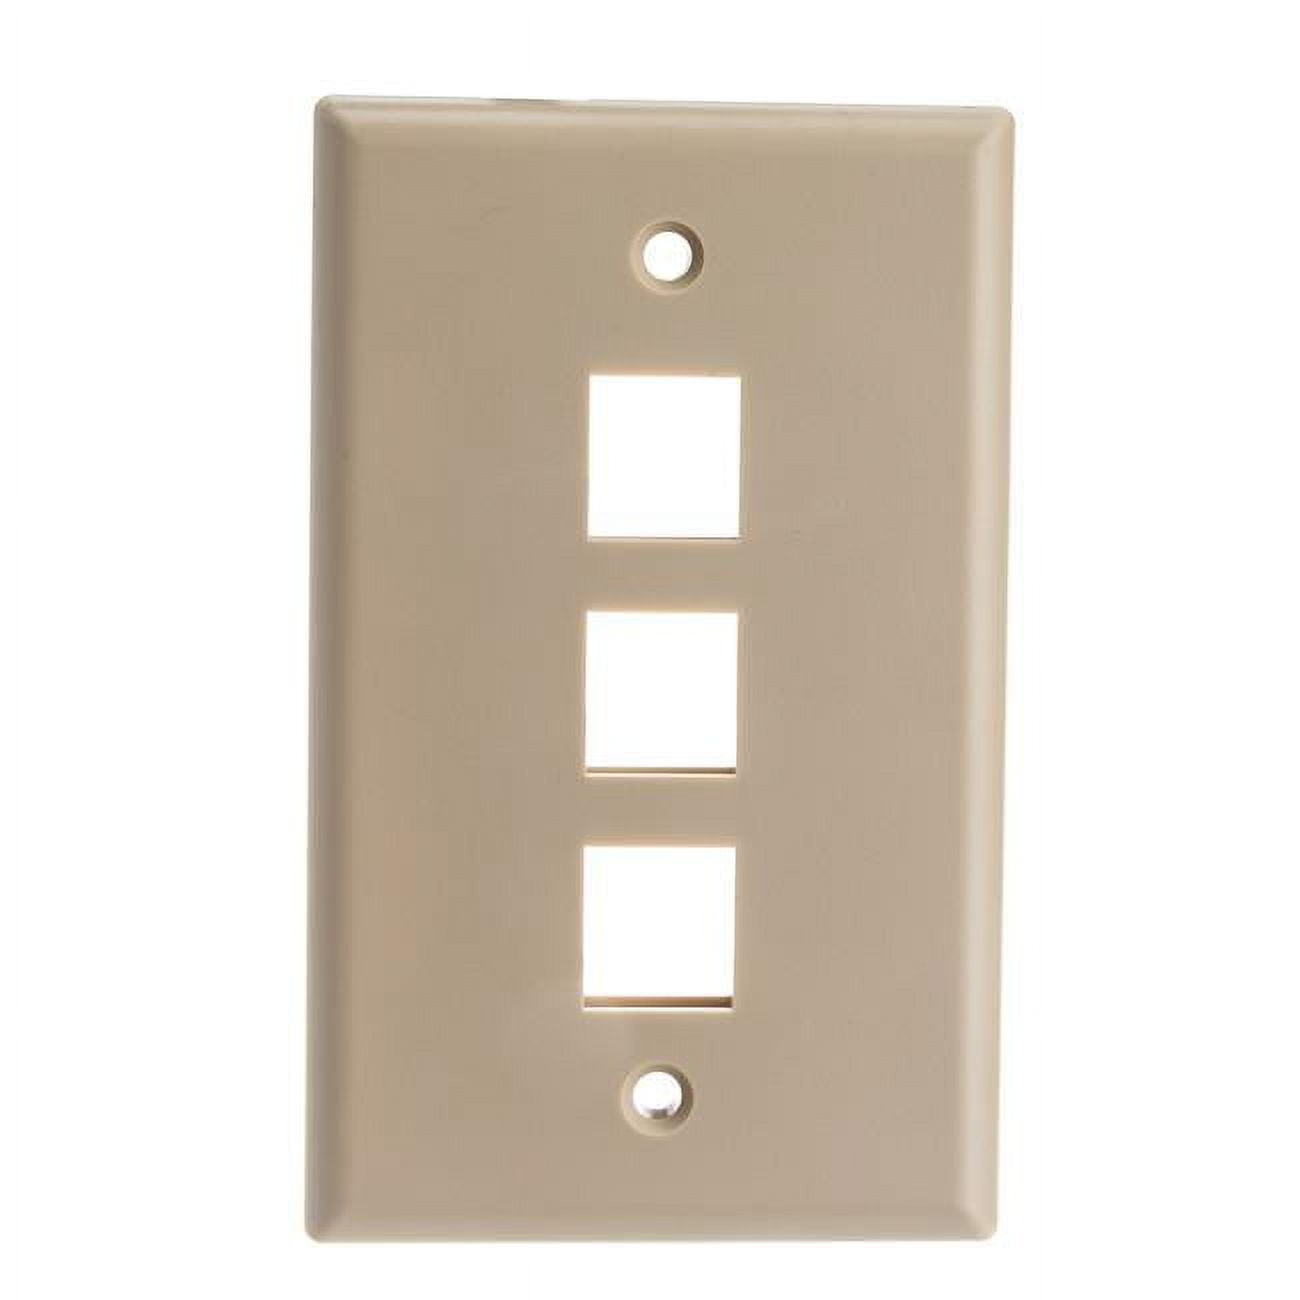 Picture of Cable Wholesale 302-2D-W 3 Hole for Keystone Jack Decora Wall Plate Insert - White